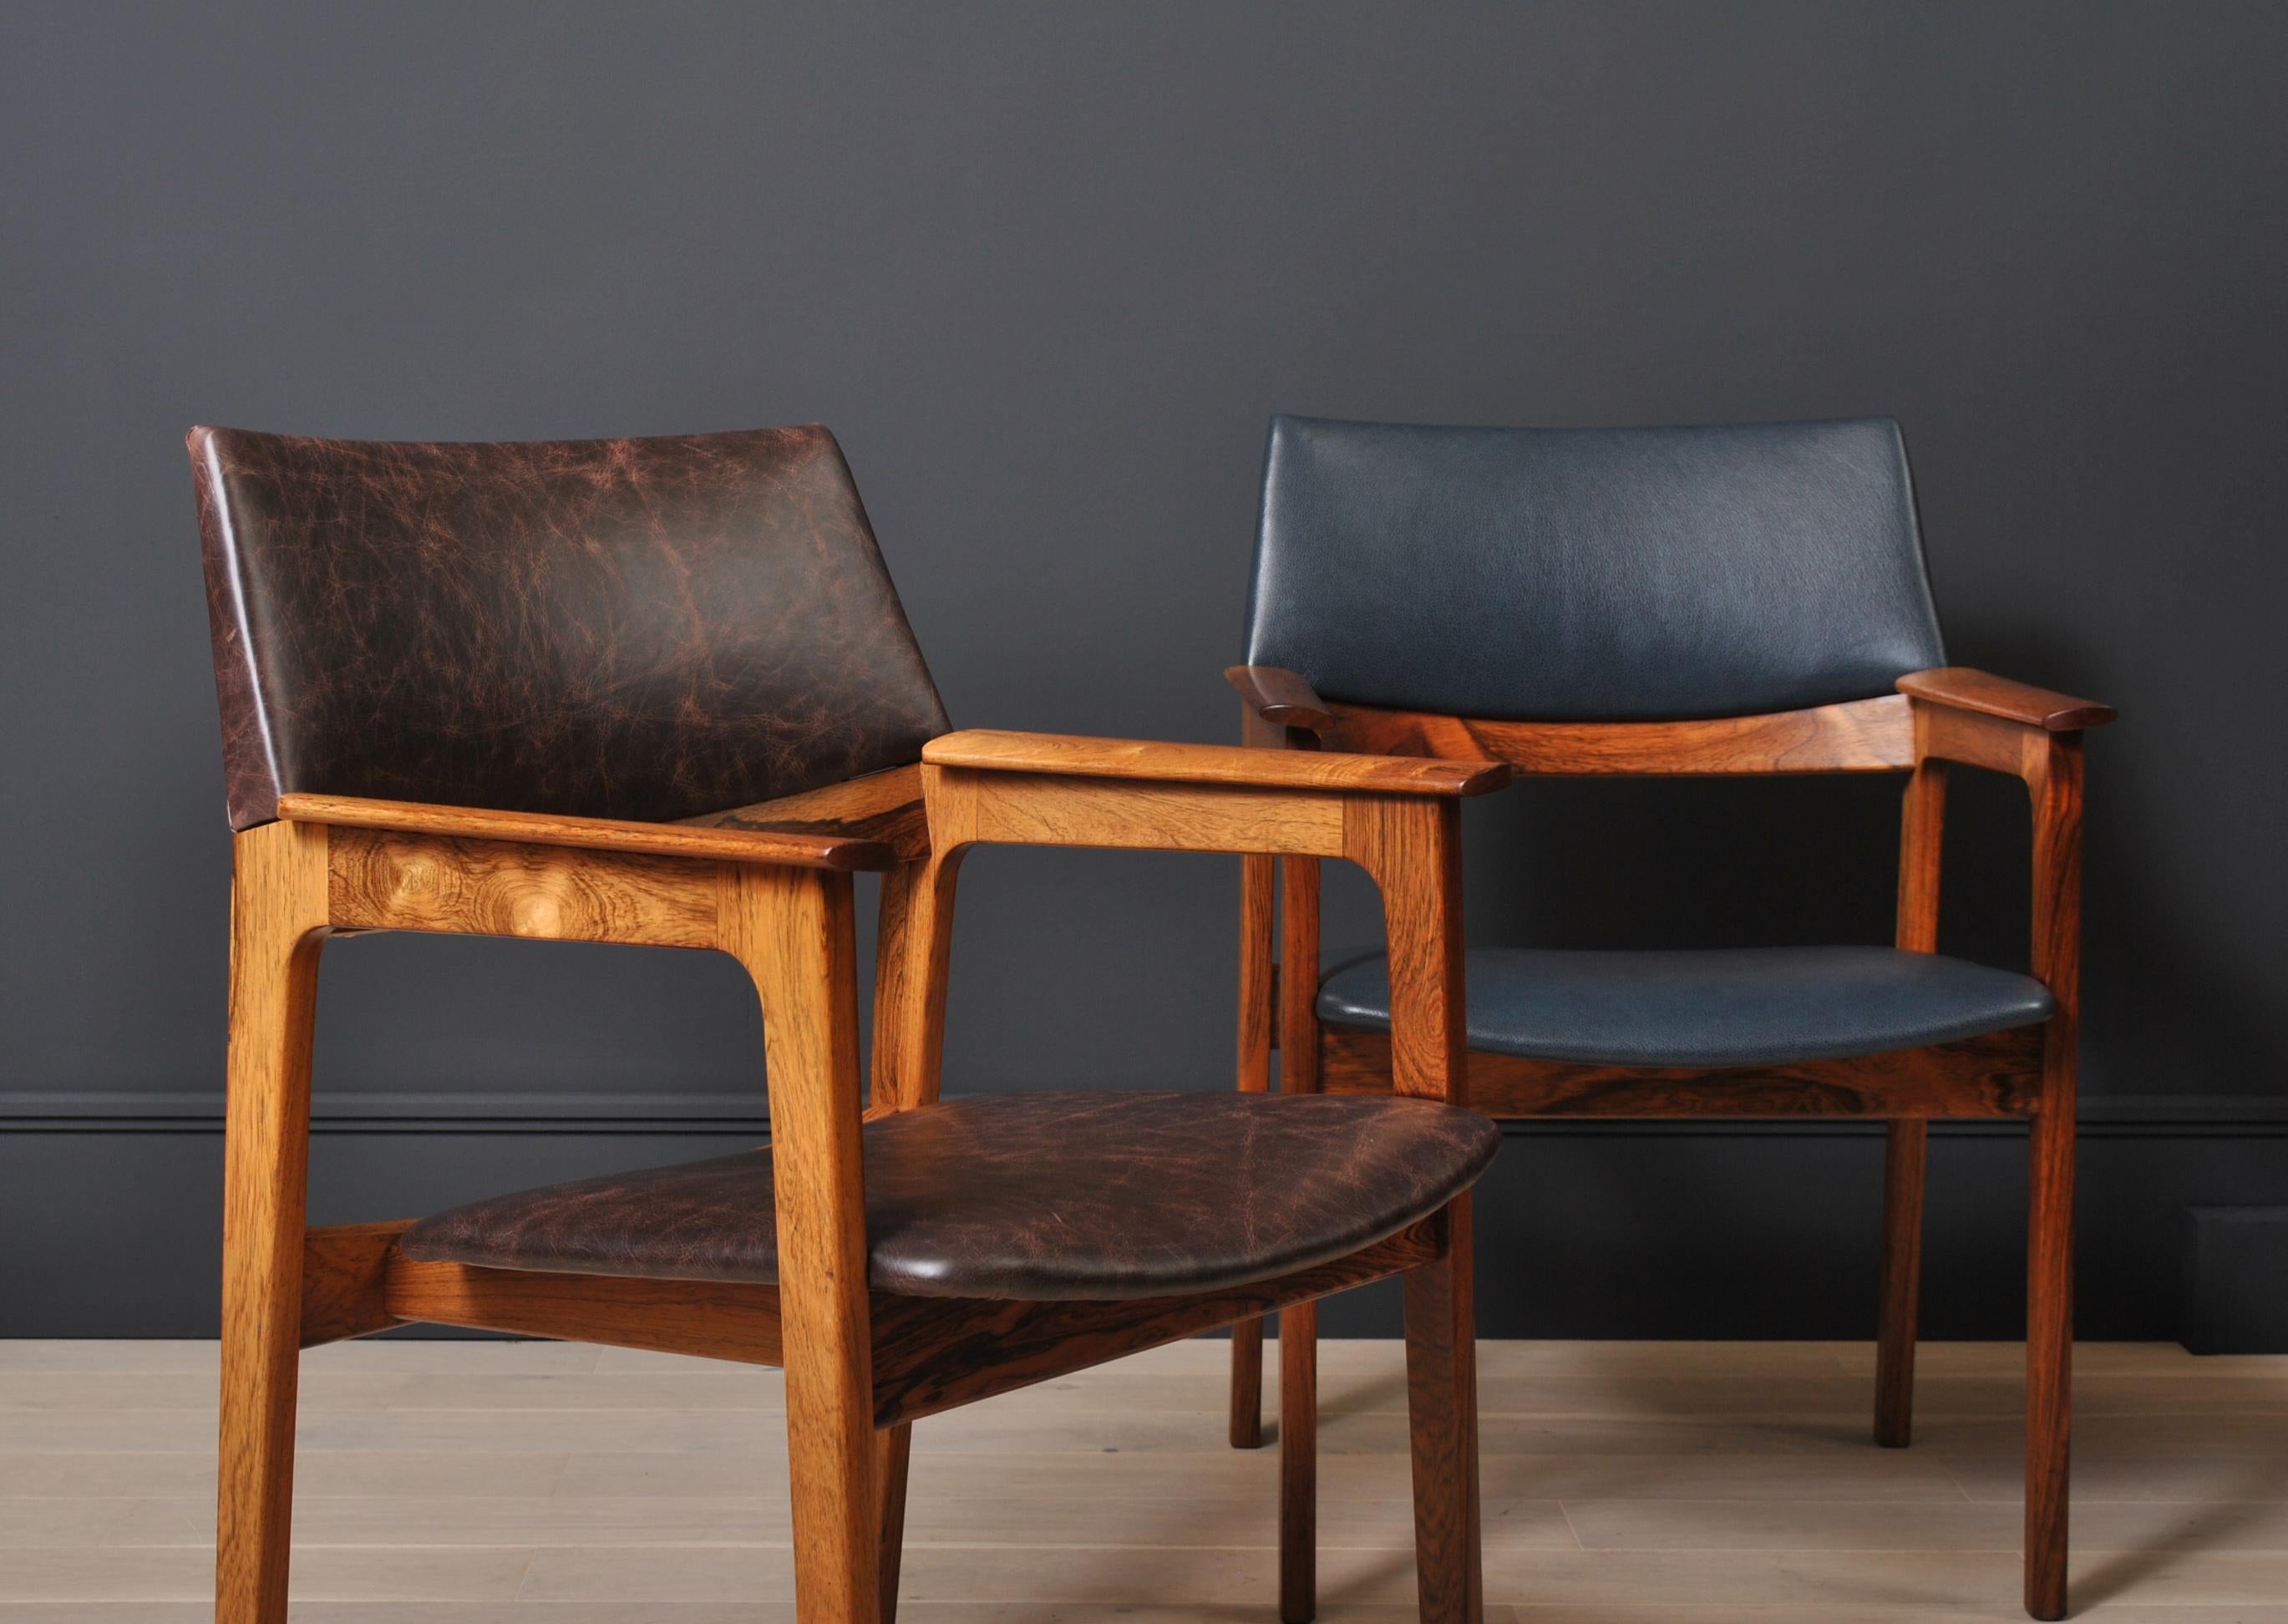 Versatile Danish midcentury chairs. Fully re-upholstered in fine Italian leather. Incredible wild grained frames, and a bold modernist 1960s design that can be utilized in many ways, from desk chair, accent to dining room.
We have more available